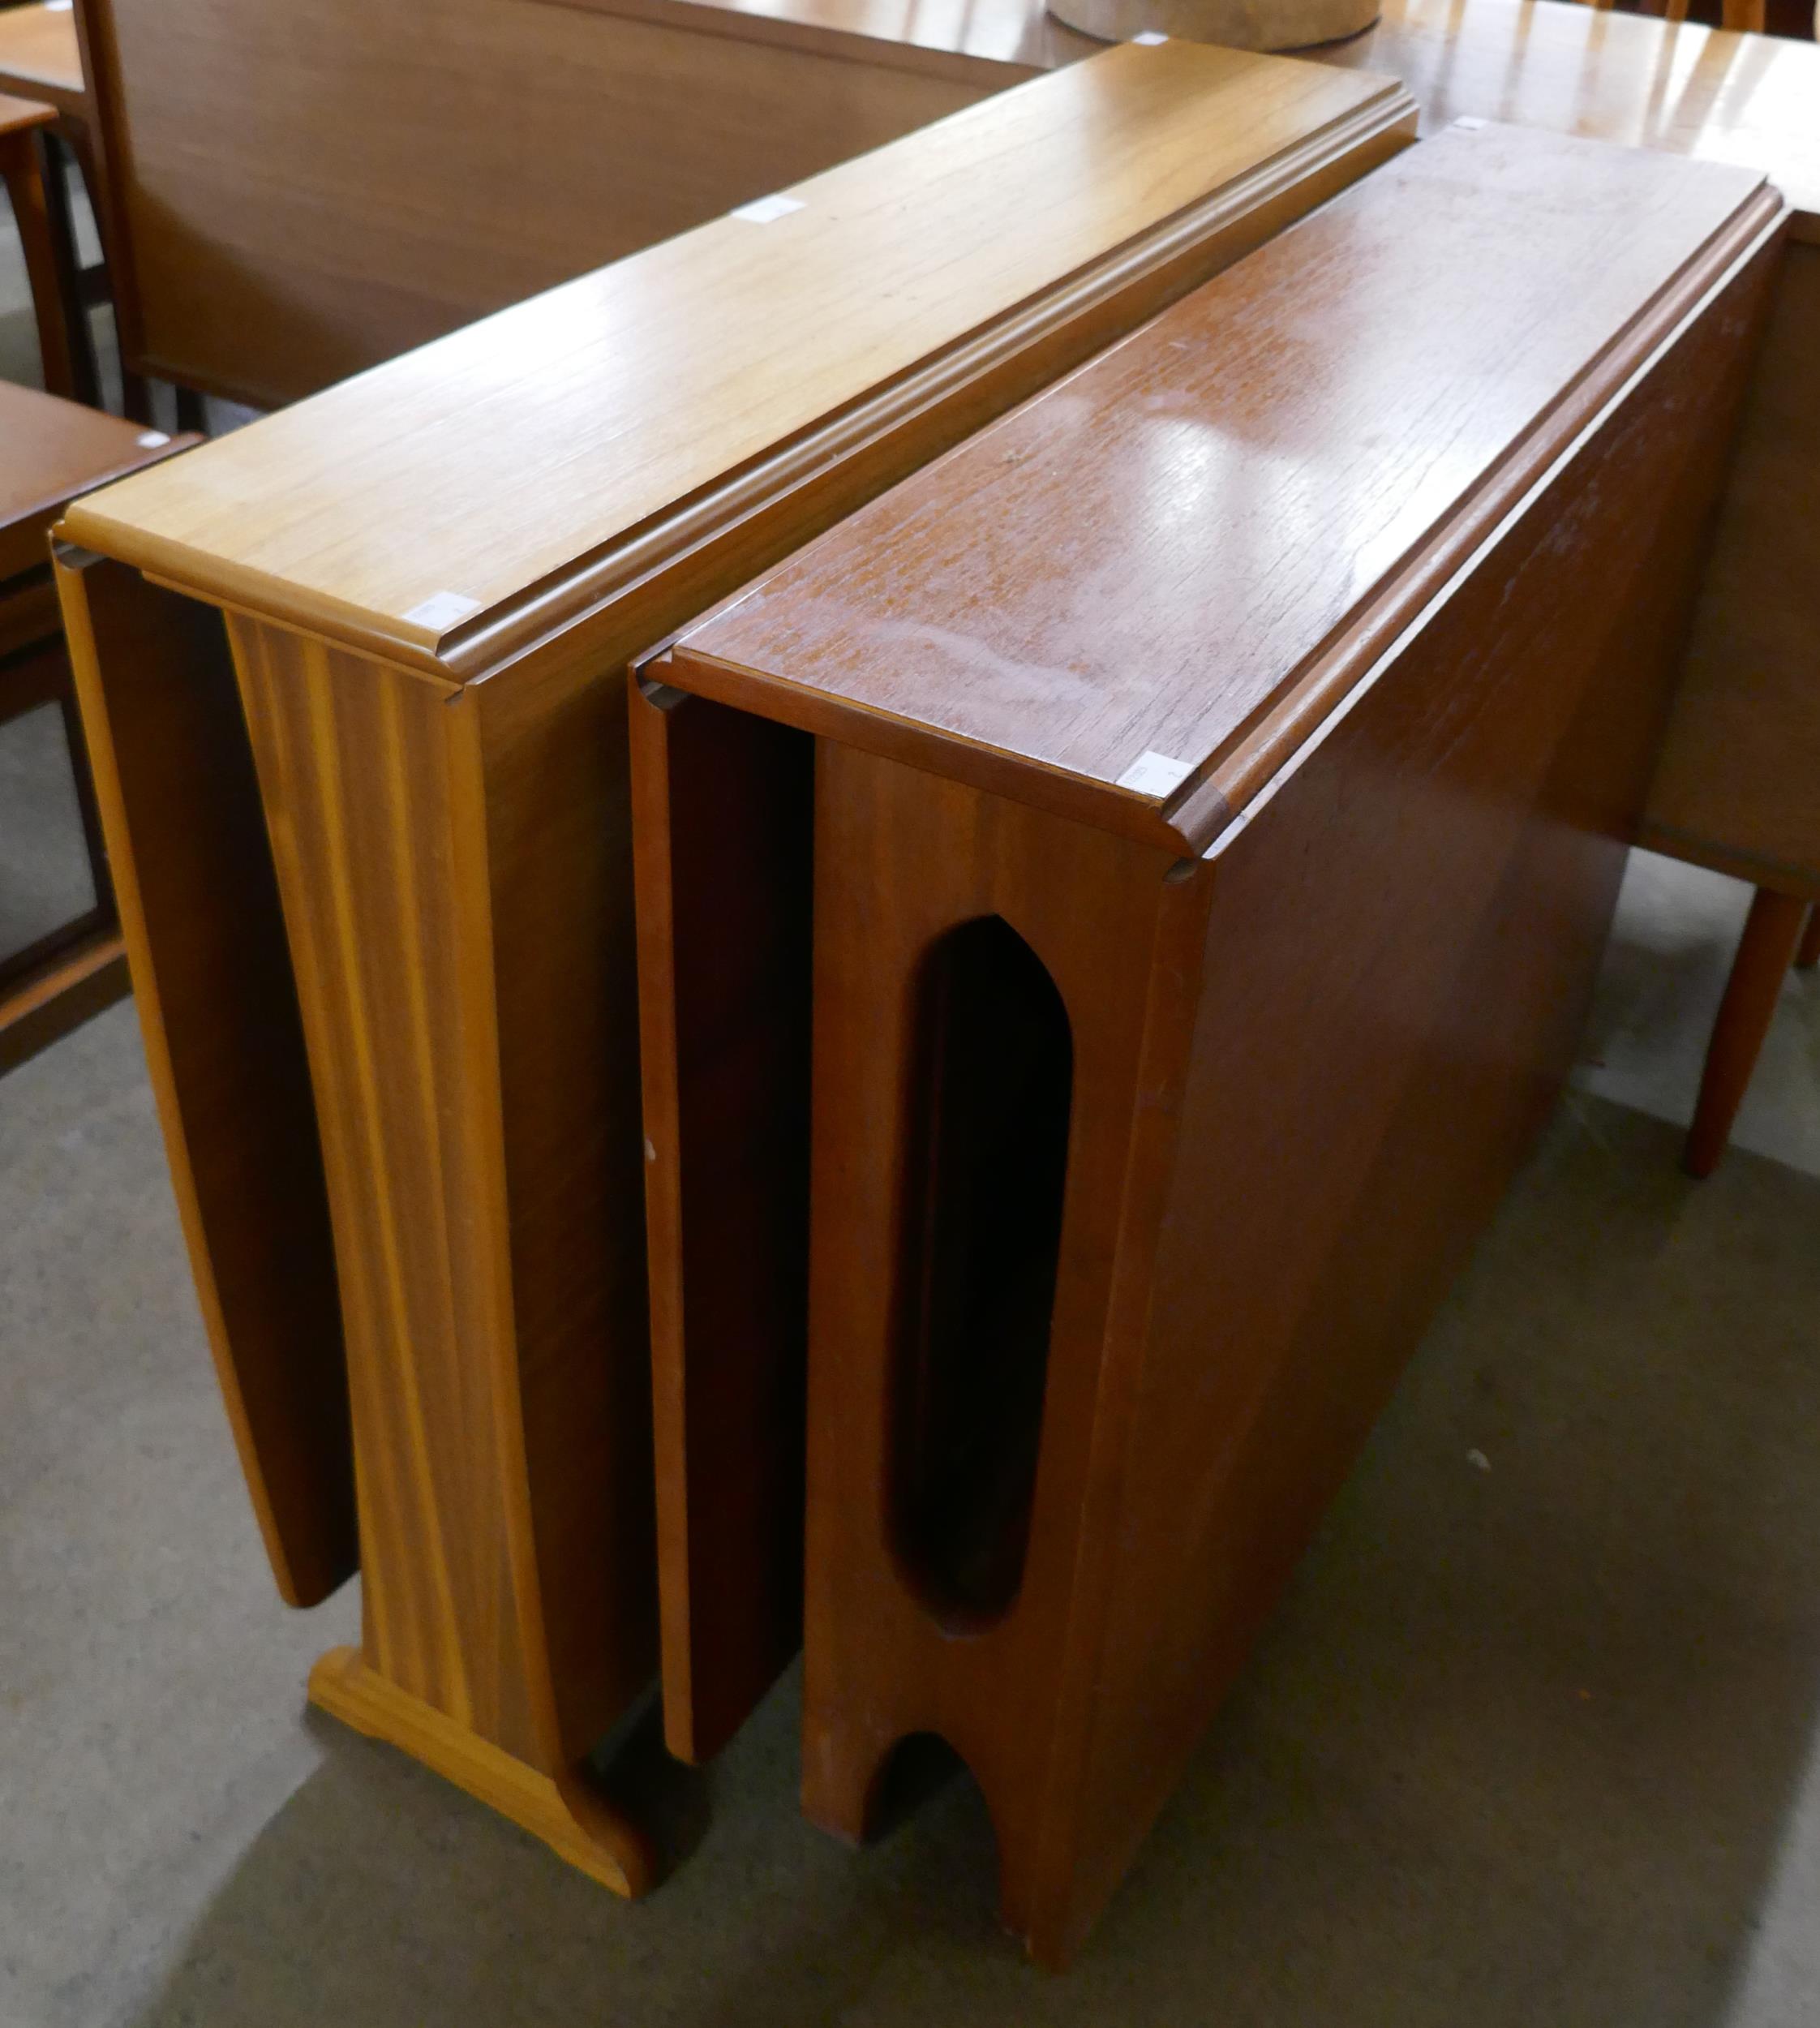 A Jentique teak drop-leaf table and one other